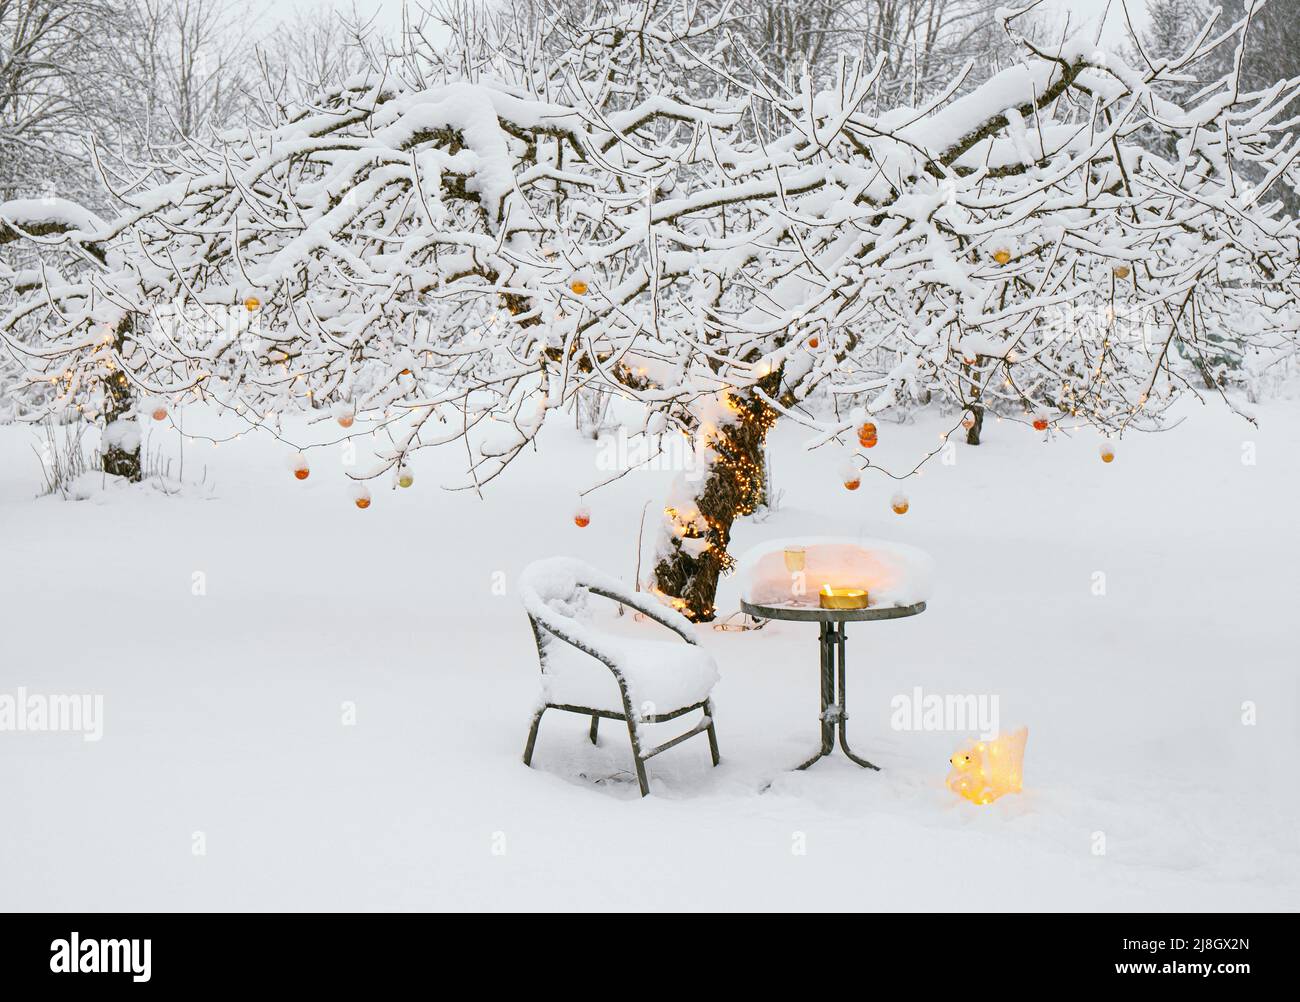 Snow covering apple tree in home garden in winter, decorated with lot of orange metallic Christmas baubles and warm white string led lights. Stock Photo